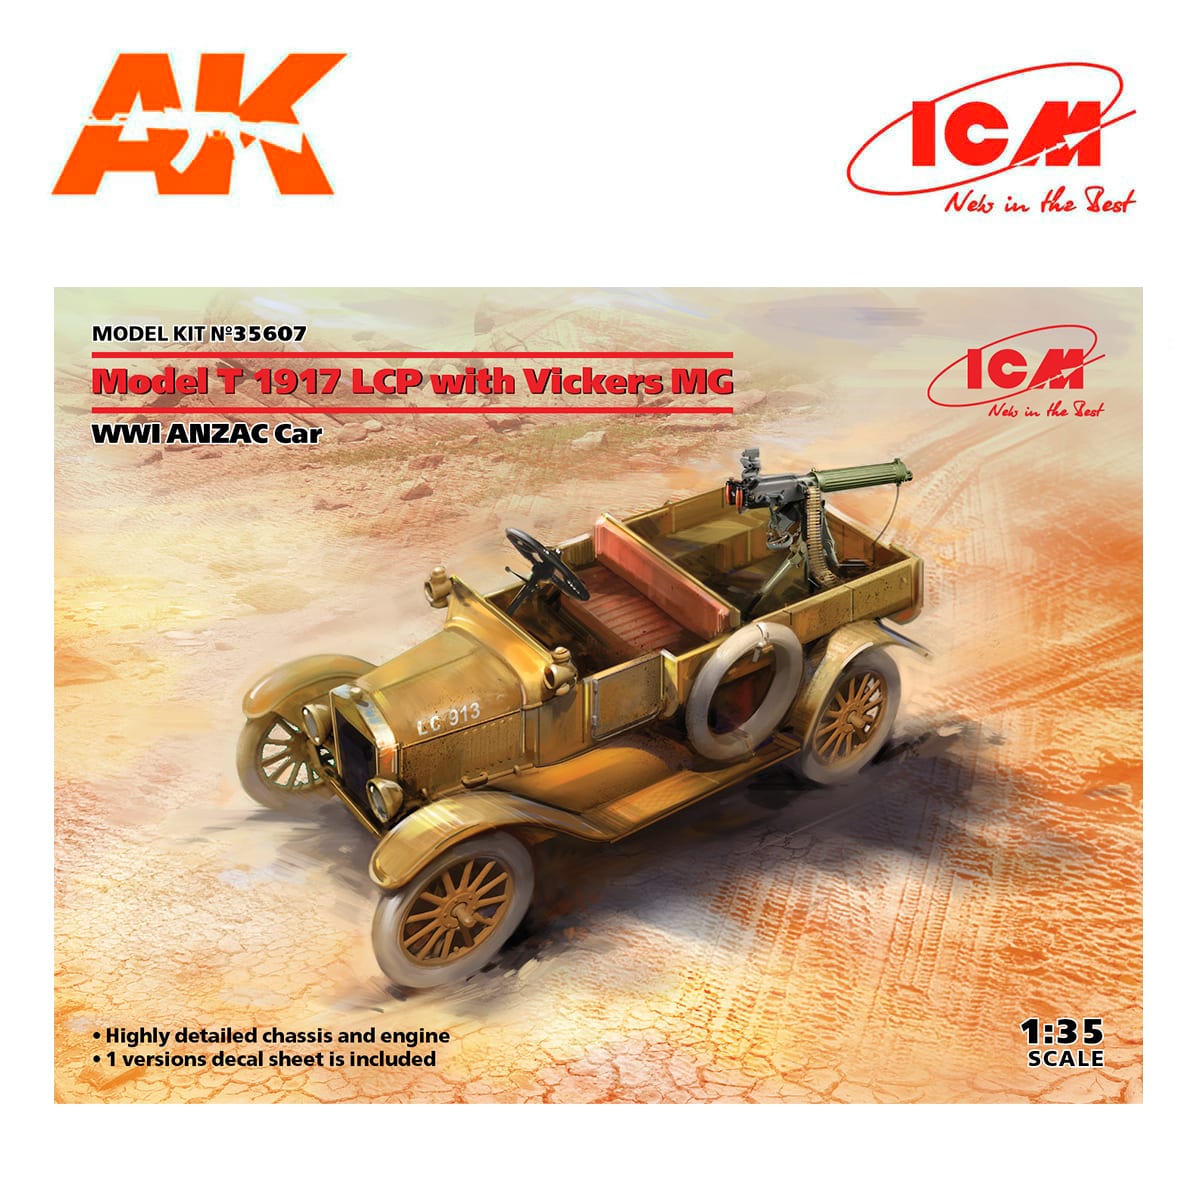 Model T 1917 LCP with Vickers MG, WWI ANZAC Car 1/35